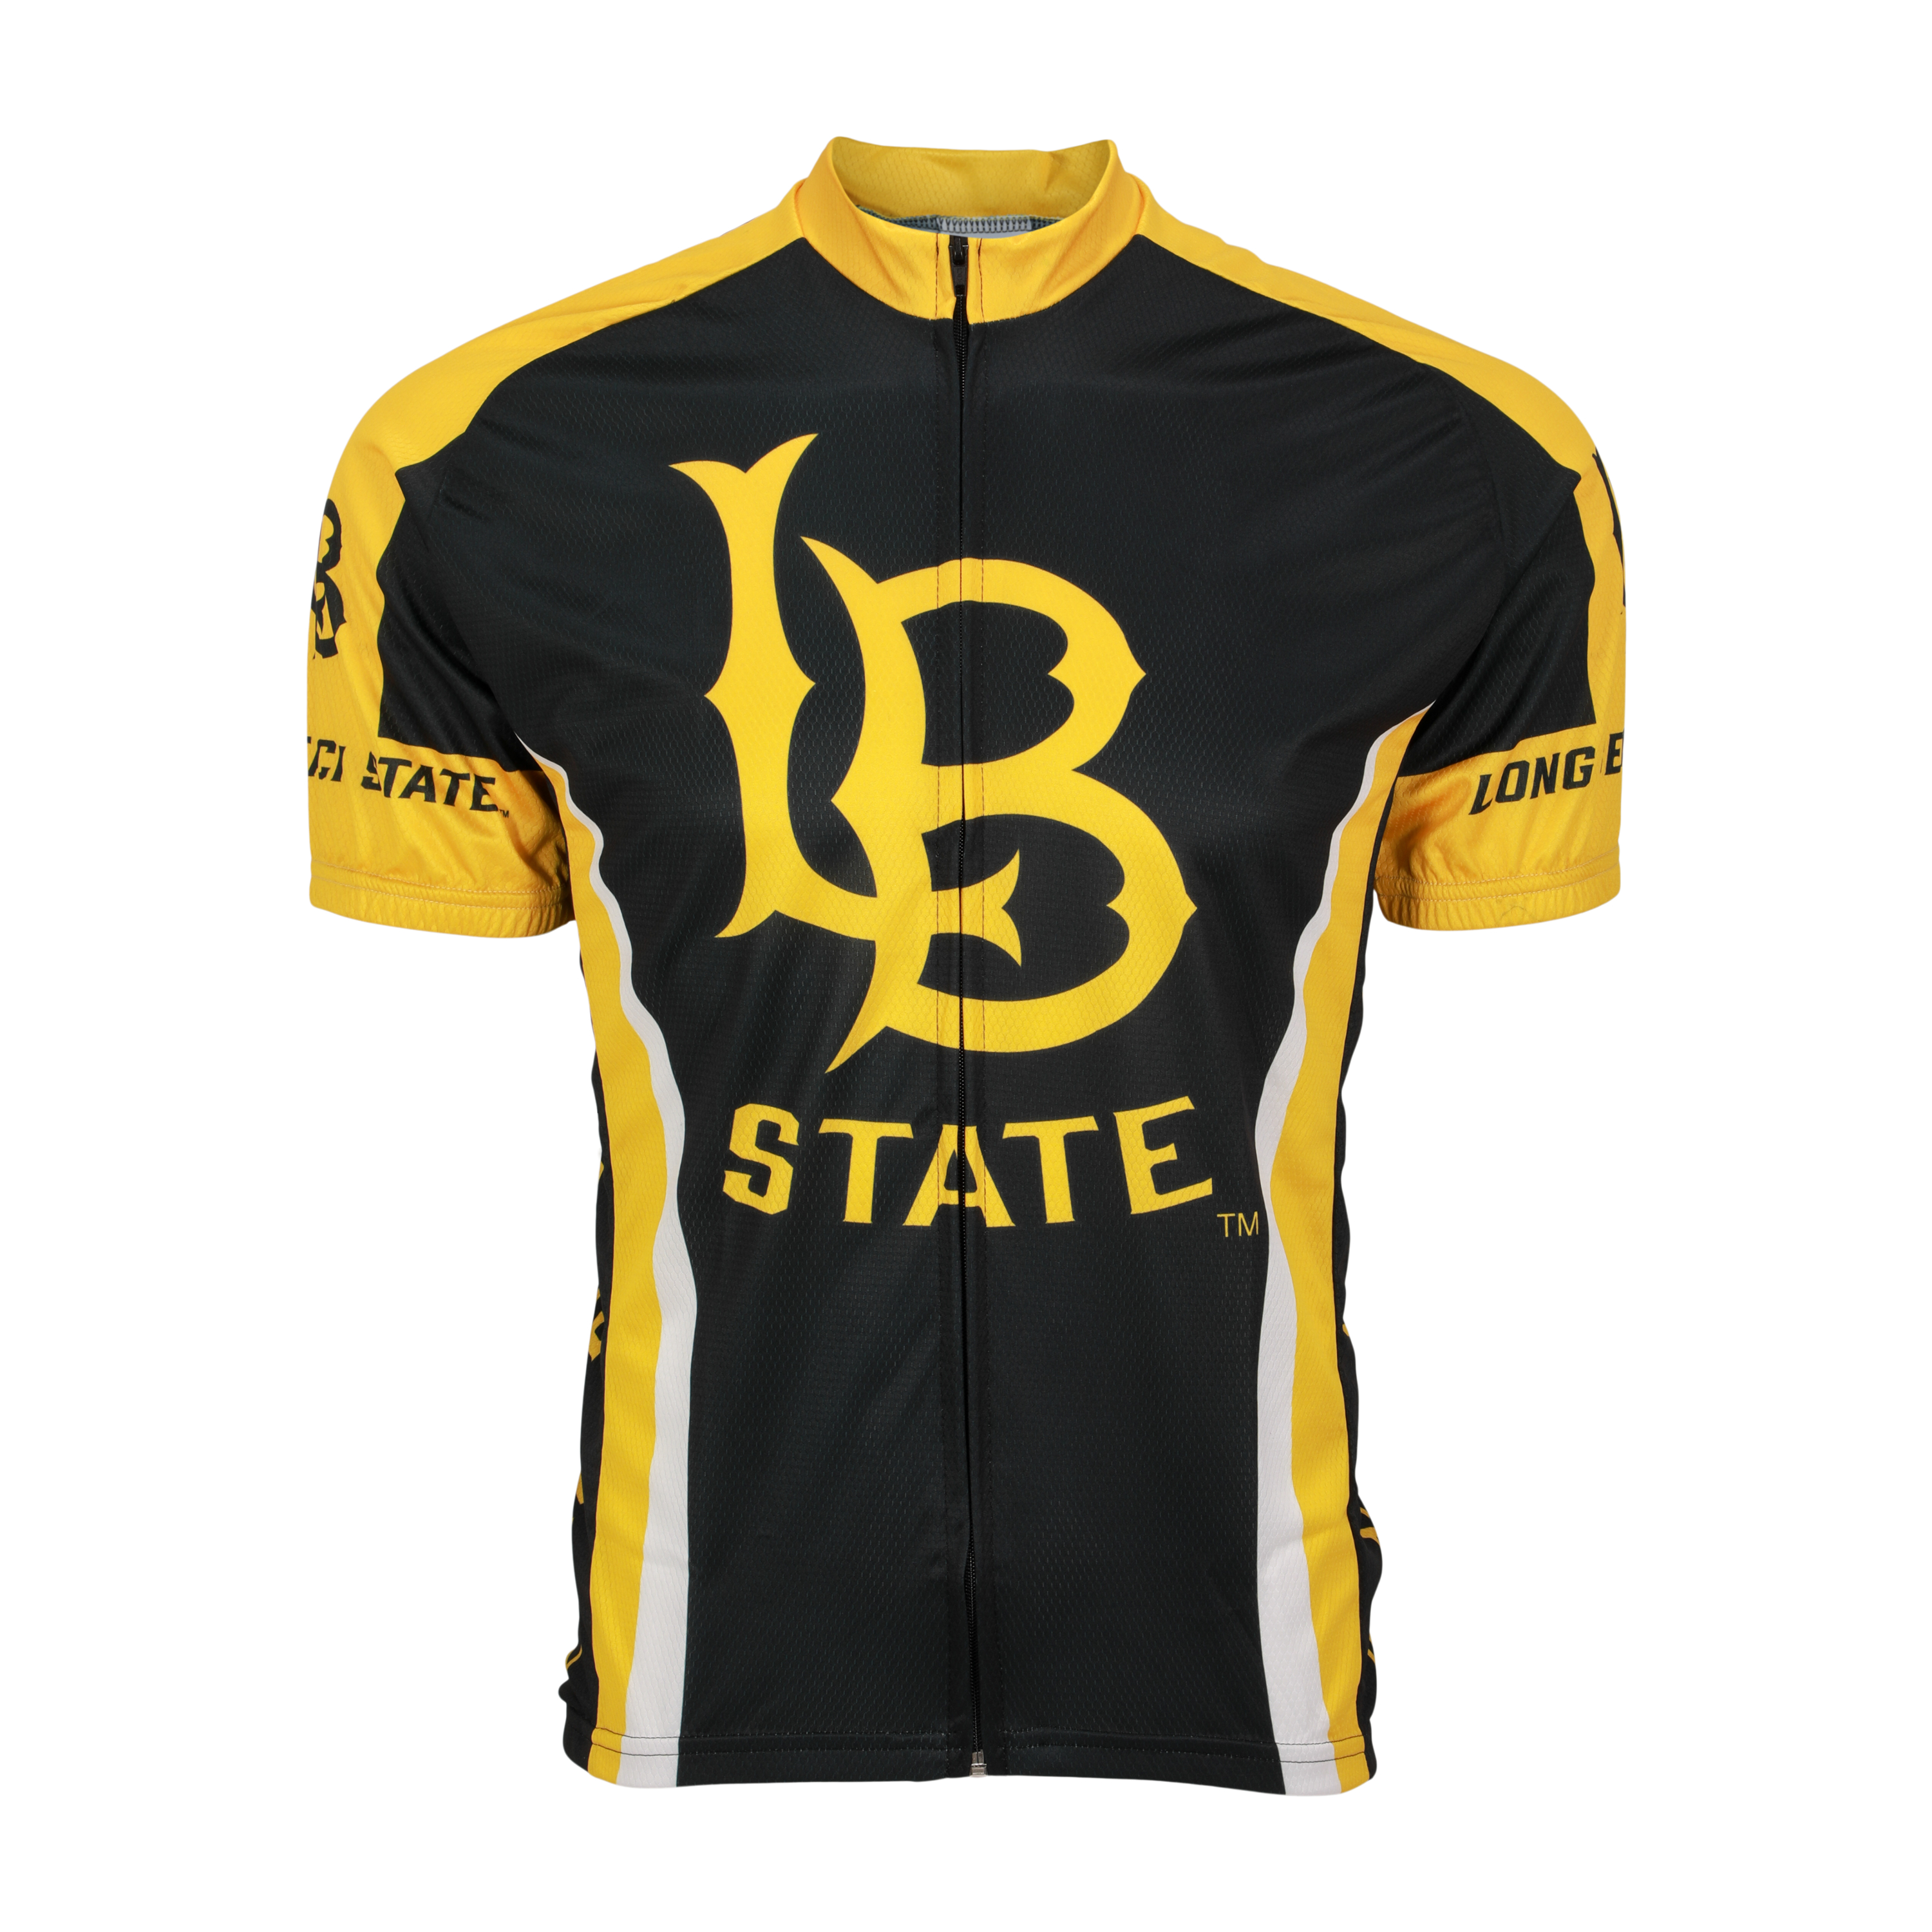 Details about   NCAA Men's Adrenaline Promotions North Carolina State Wolfpack Road Cycling Jers 